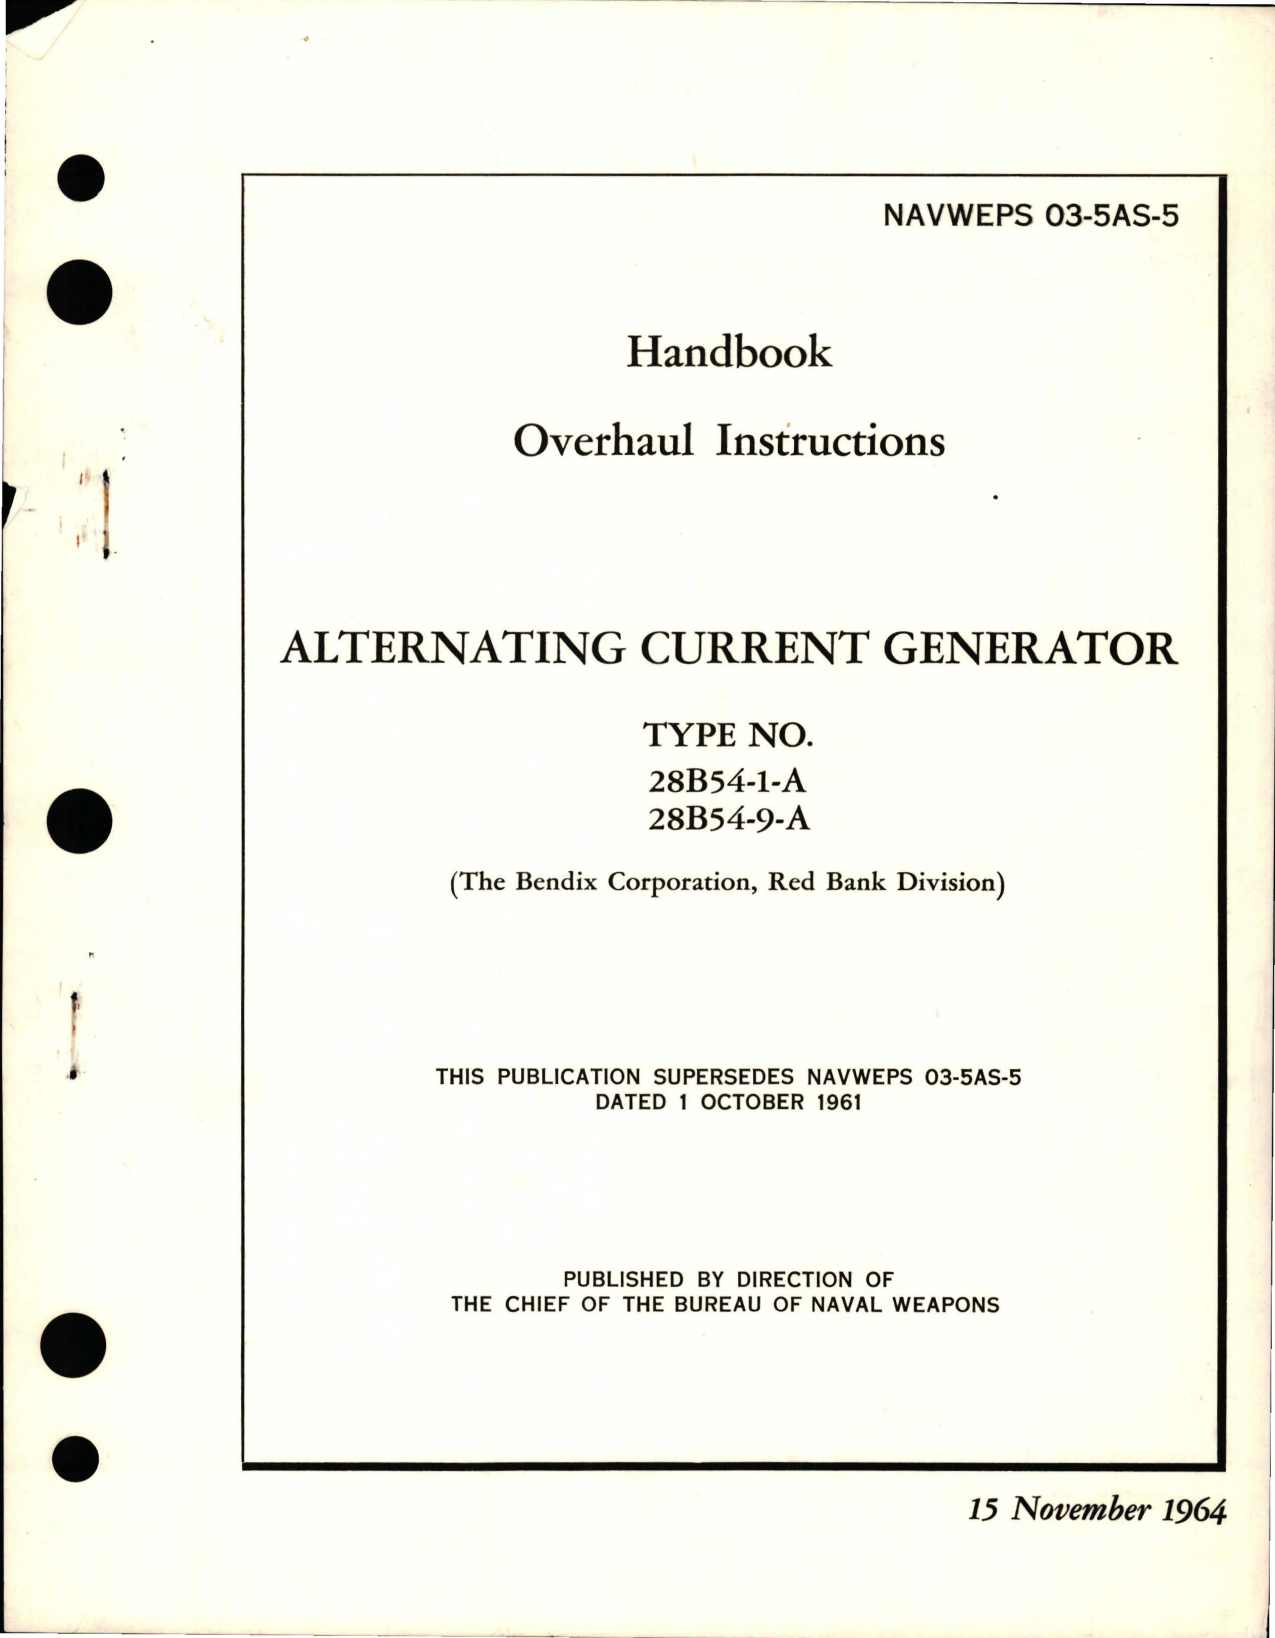 Sample page 1 from AirCorps Library document: Overhaul Instructions for Alternating Current Generator - Types 28B54-1-A and 28B54-9-A 